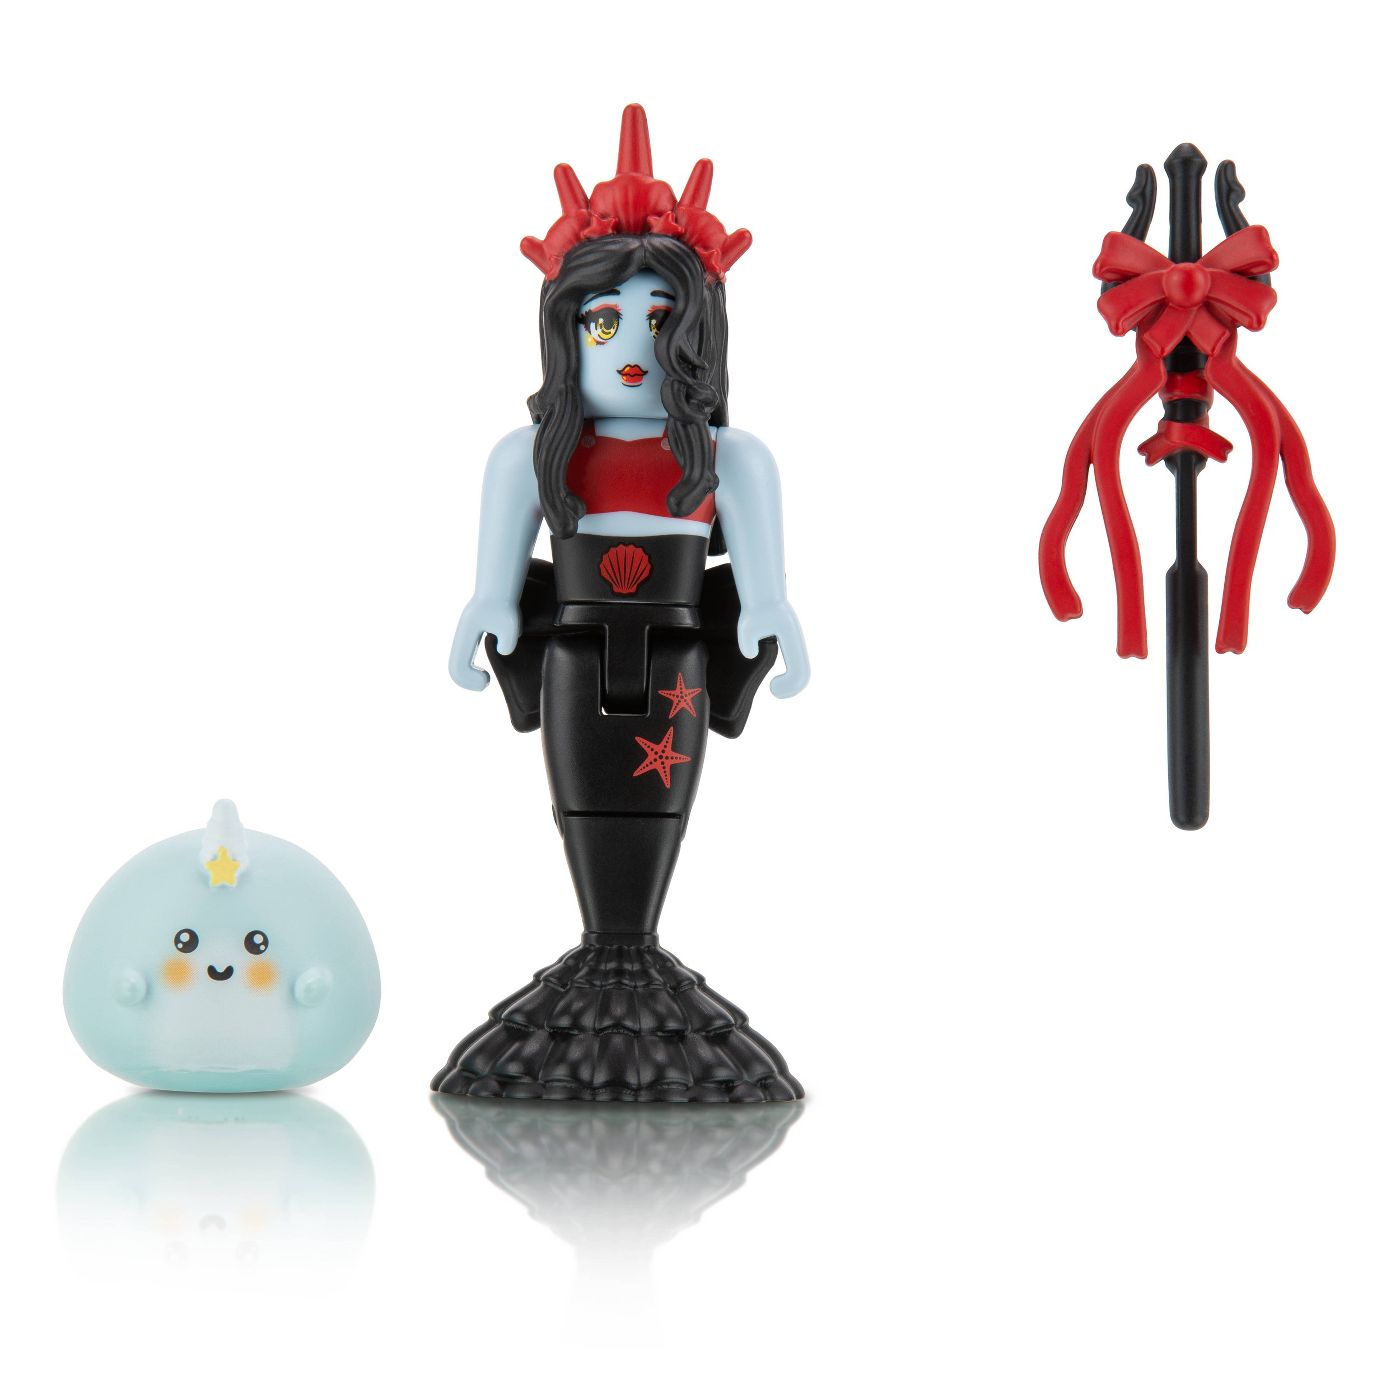 Roblox Celebrity Collection Star Sorority: Dark Mermaid Figure + Two  Mystery Figure Bundle (Includes 3 Exclusive Virtual Items) 